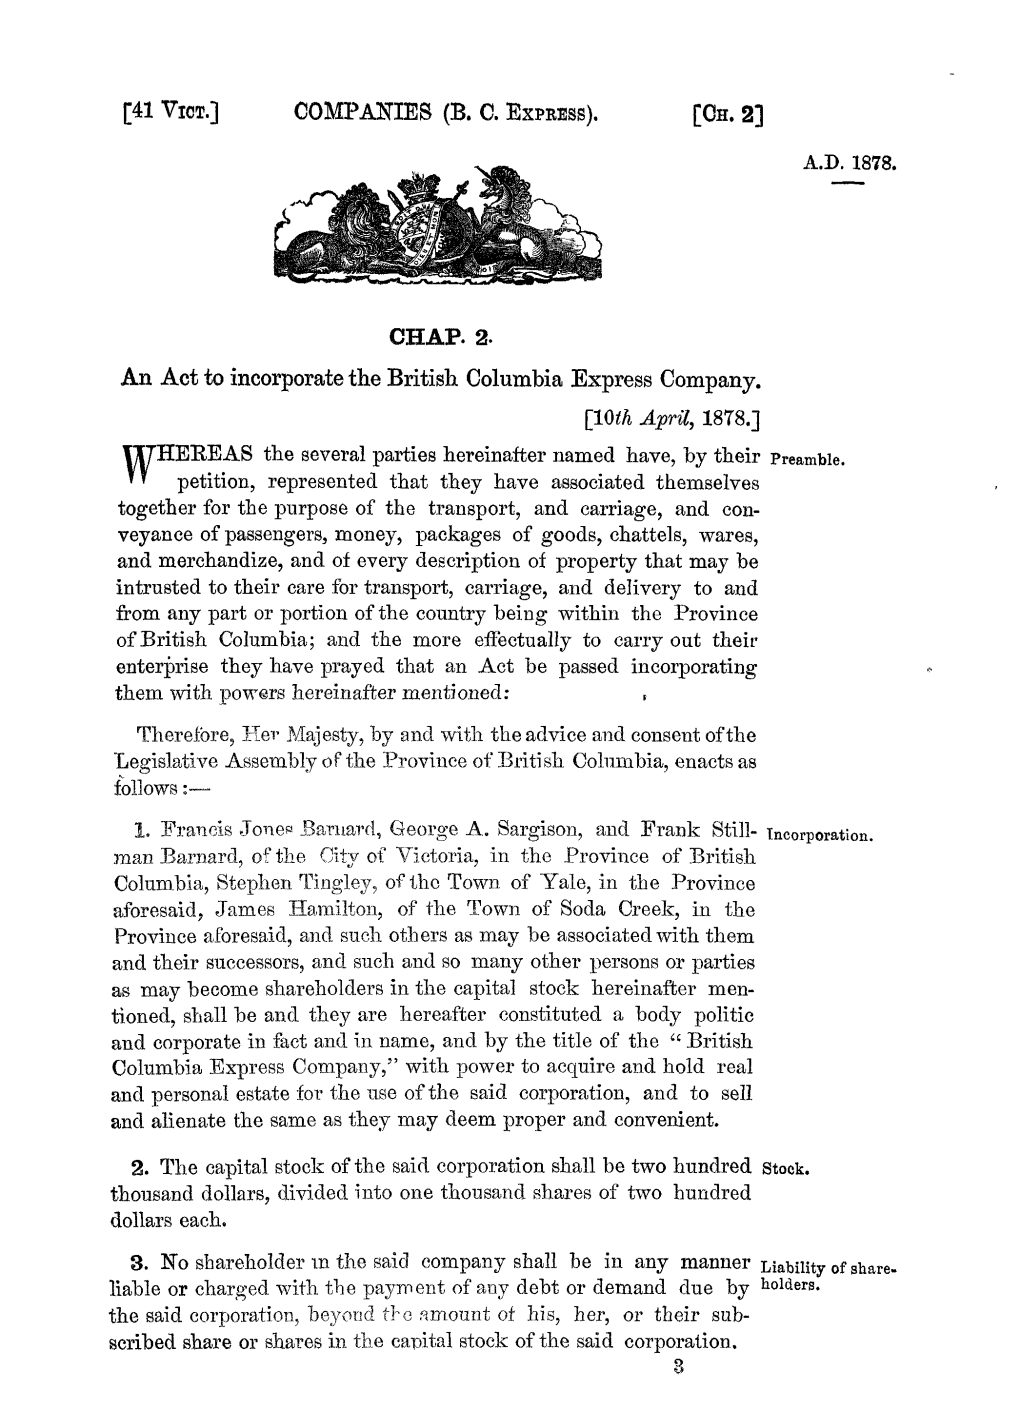 COMPANIES (B. C. EXPRESS). CHAP. 2. an Act to Incorporate the British